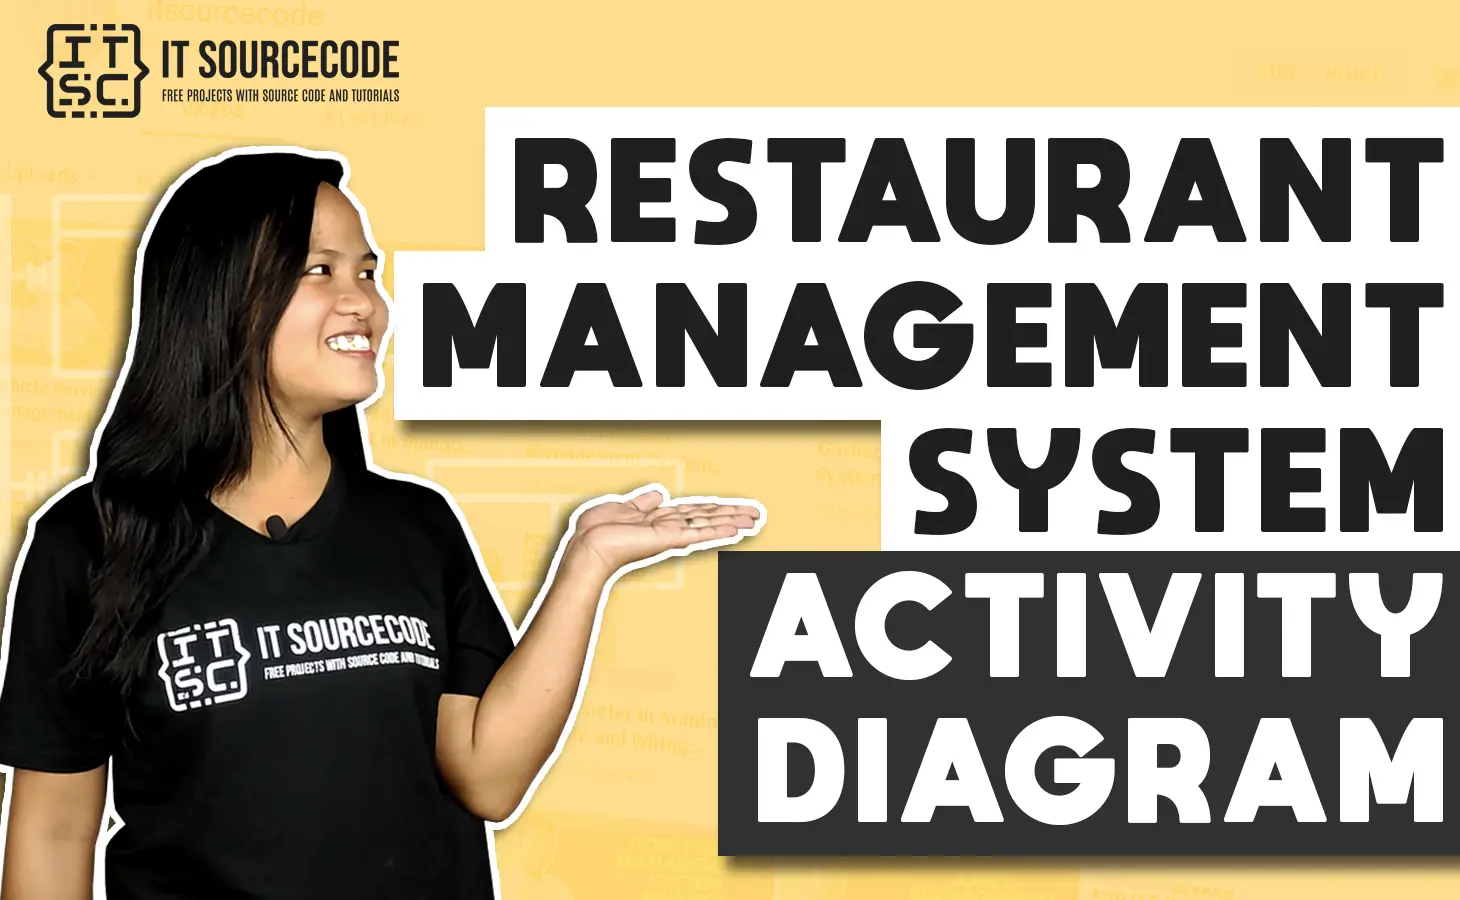 Activity Diagrams of Restaurant Management System